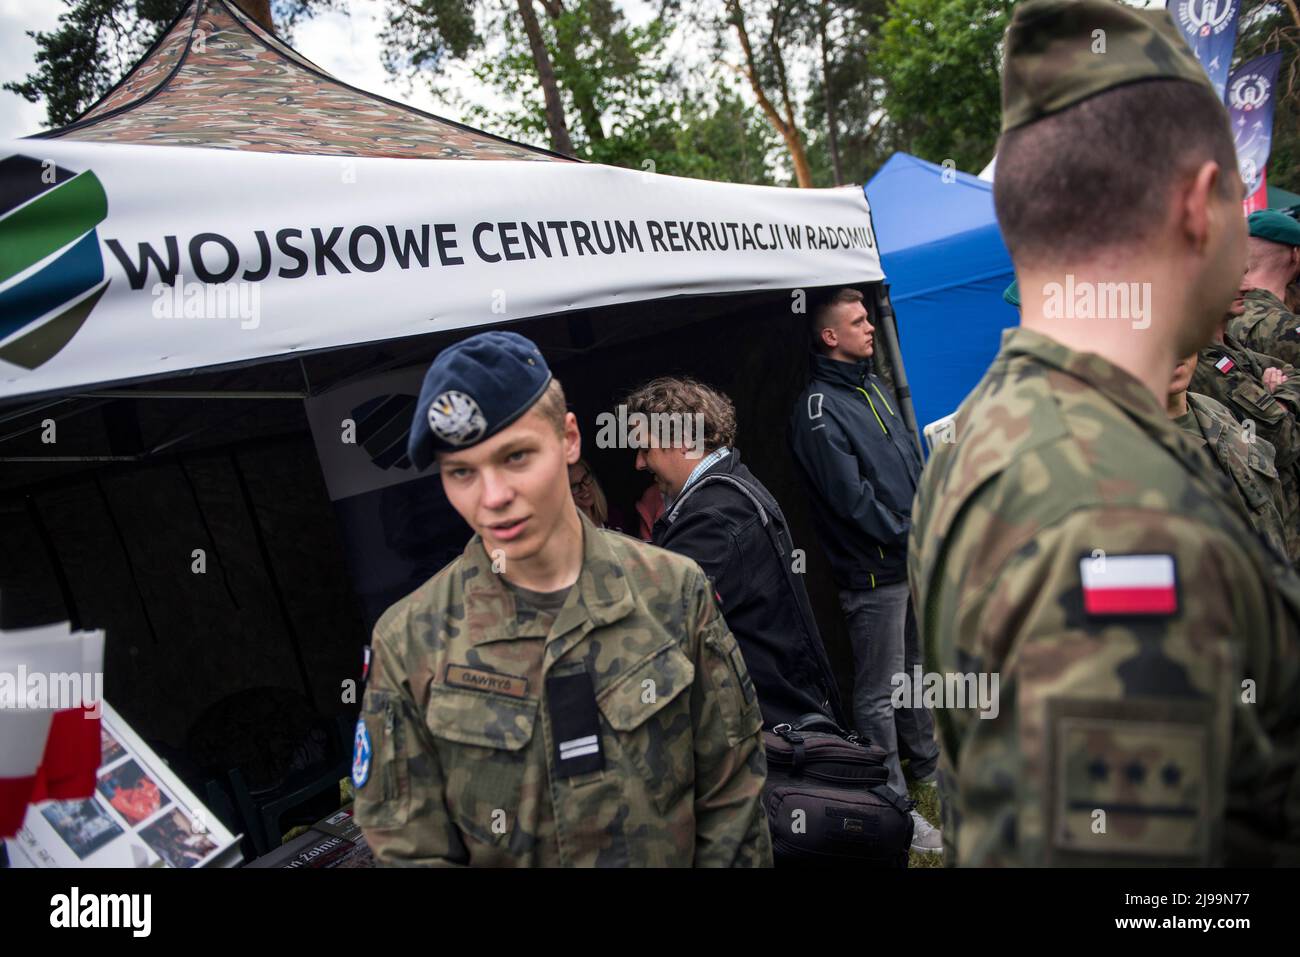 A stand with the military recruitment center is seen at the military picnic. Recruitment for Poland’s new voluntary general military service begins from May 21st as the government seeks to double the size of its armed forces. The Defense ministry has revealed details on the conditions for the year-long service, including pay rates and benefits.The introduction of voluntary basic military service was provided for by the Homeland Defense Act, which was initially proposed by the government in October but signed into law shortly after the Russian invasion of Ukraine. Stock Photo